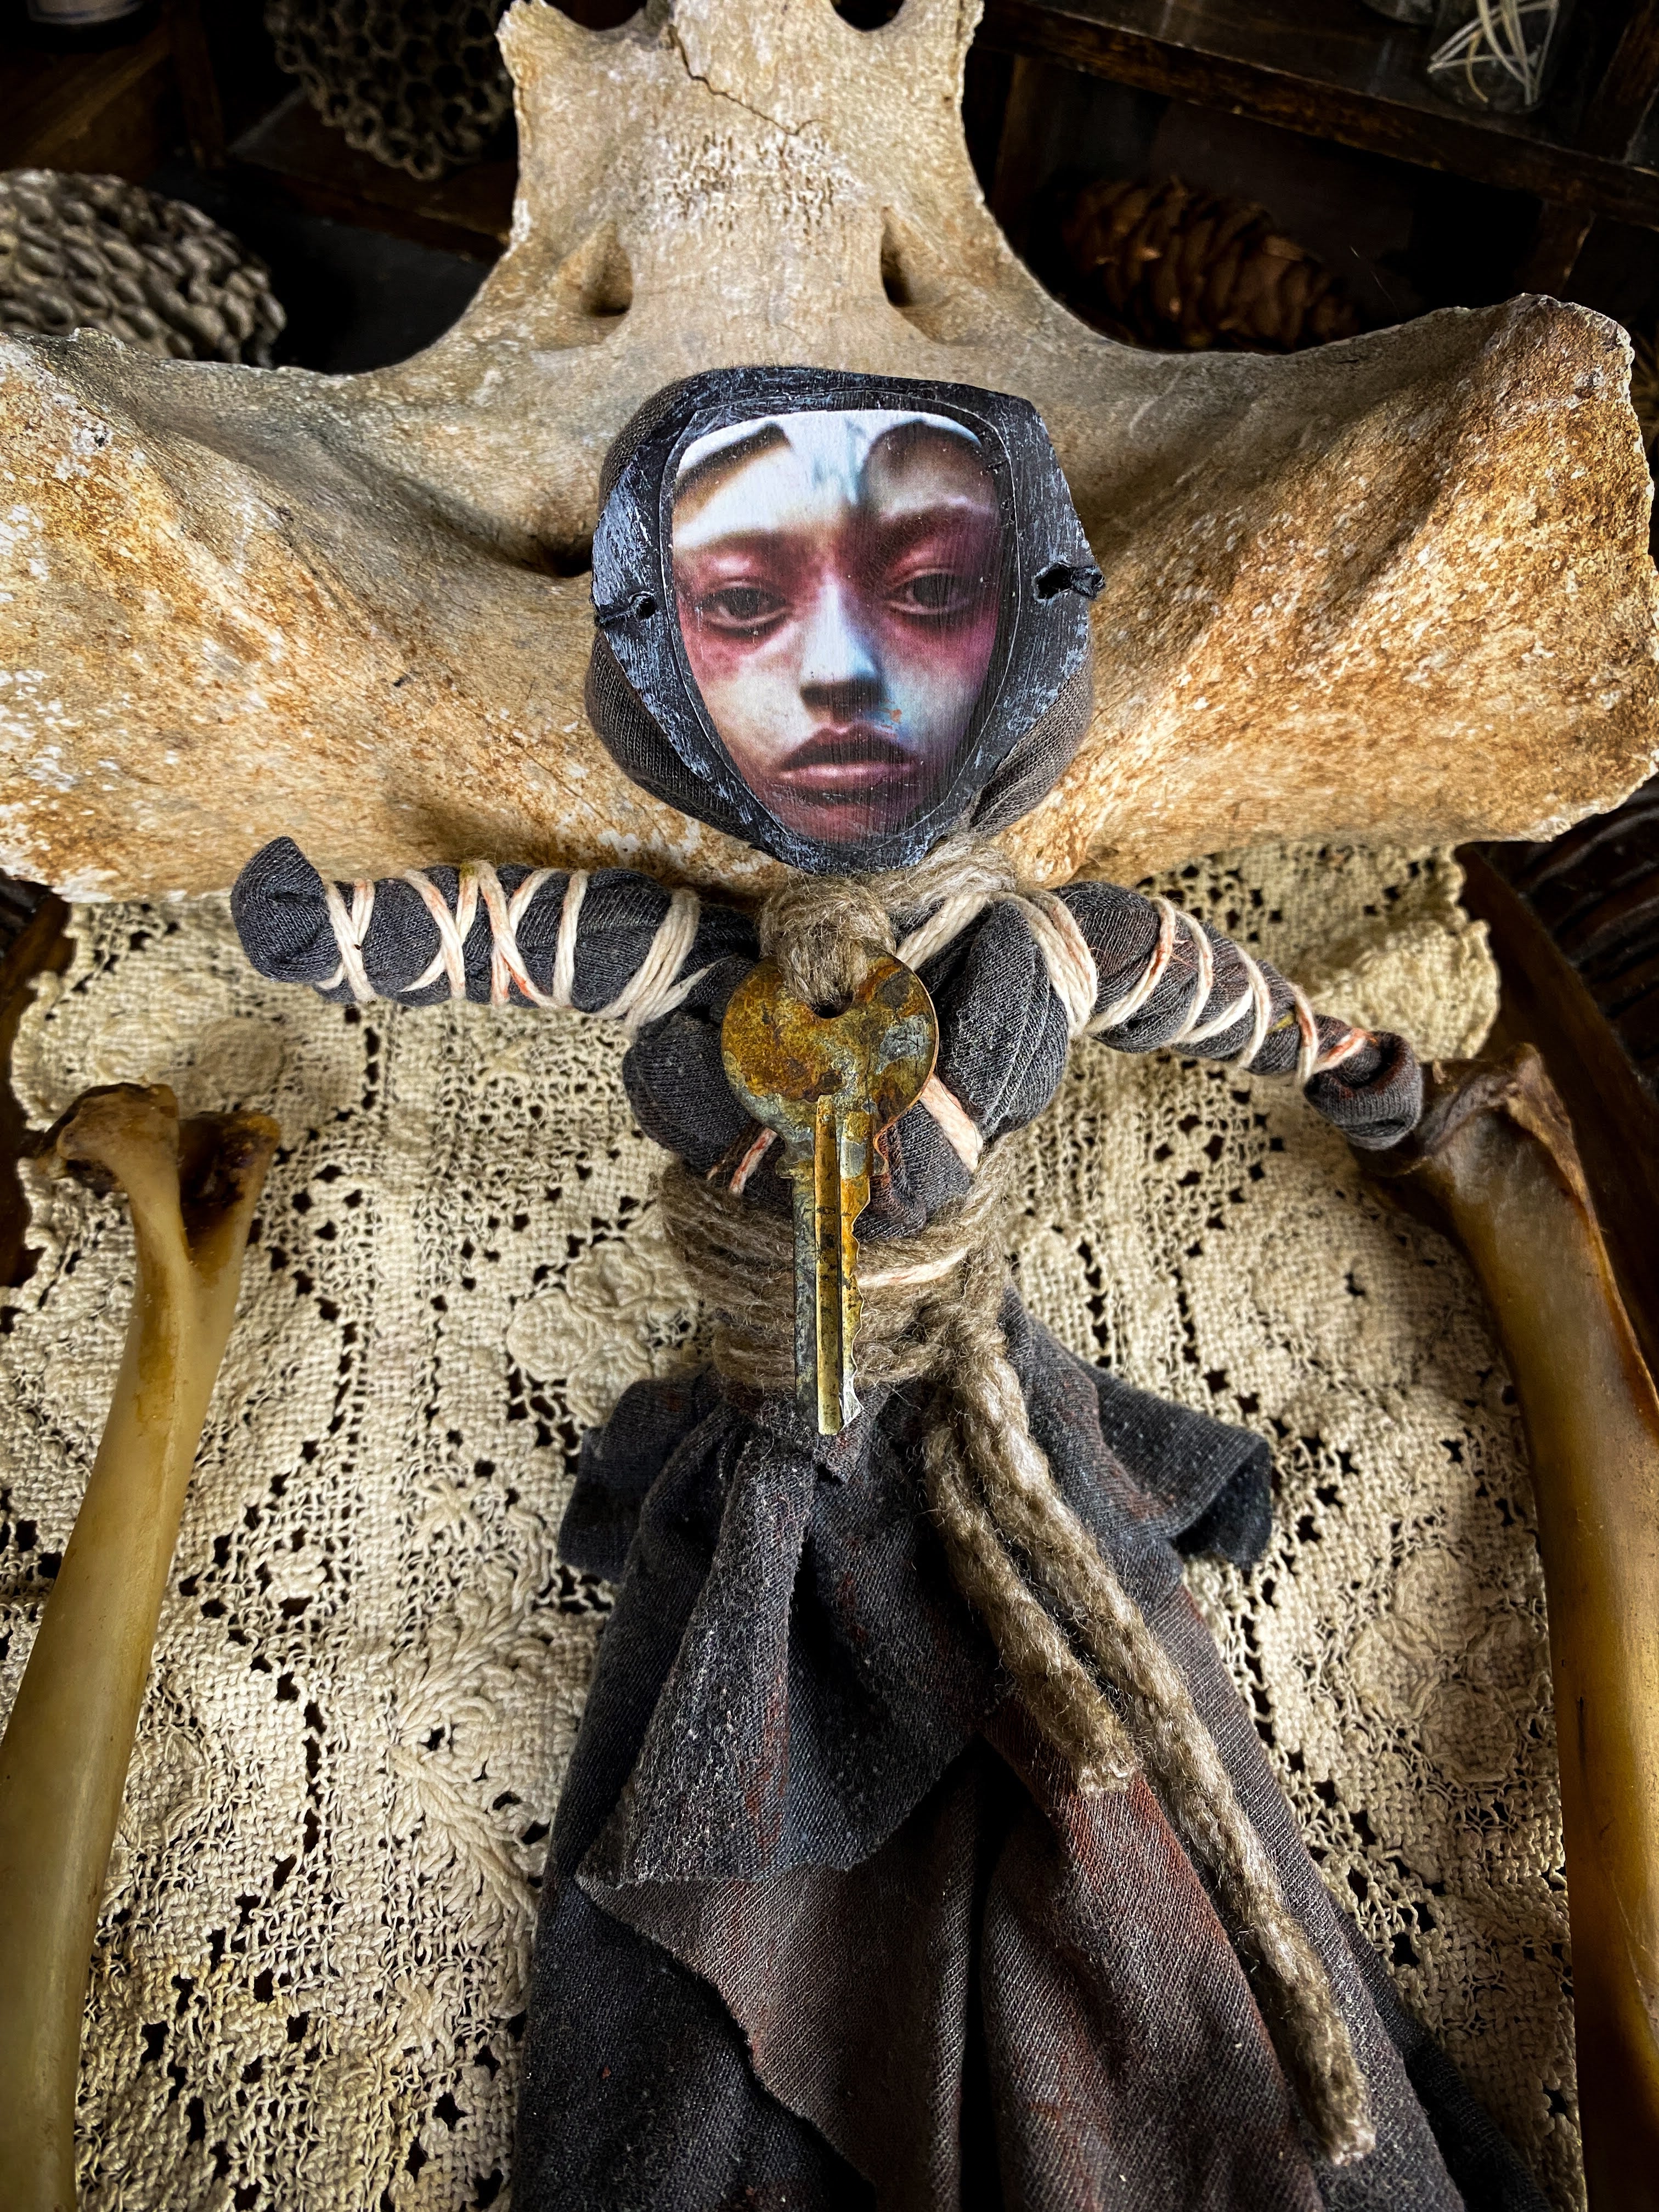 Intention Doll Containing Herbs, Roots, Stones, Snake Skin, Shells - Poppet, Conjure Doll, Medicine Doll, Spirit Doll